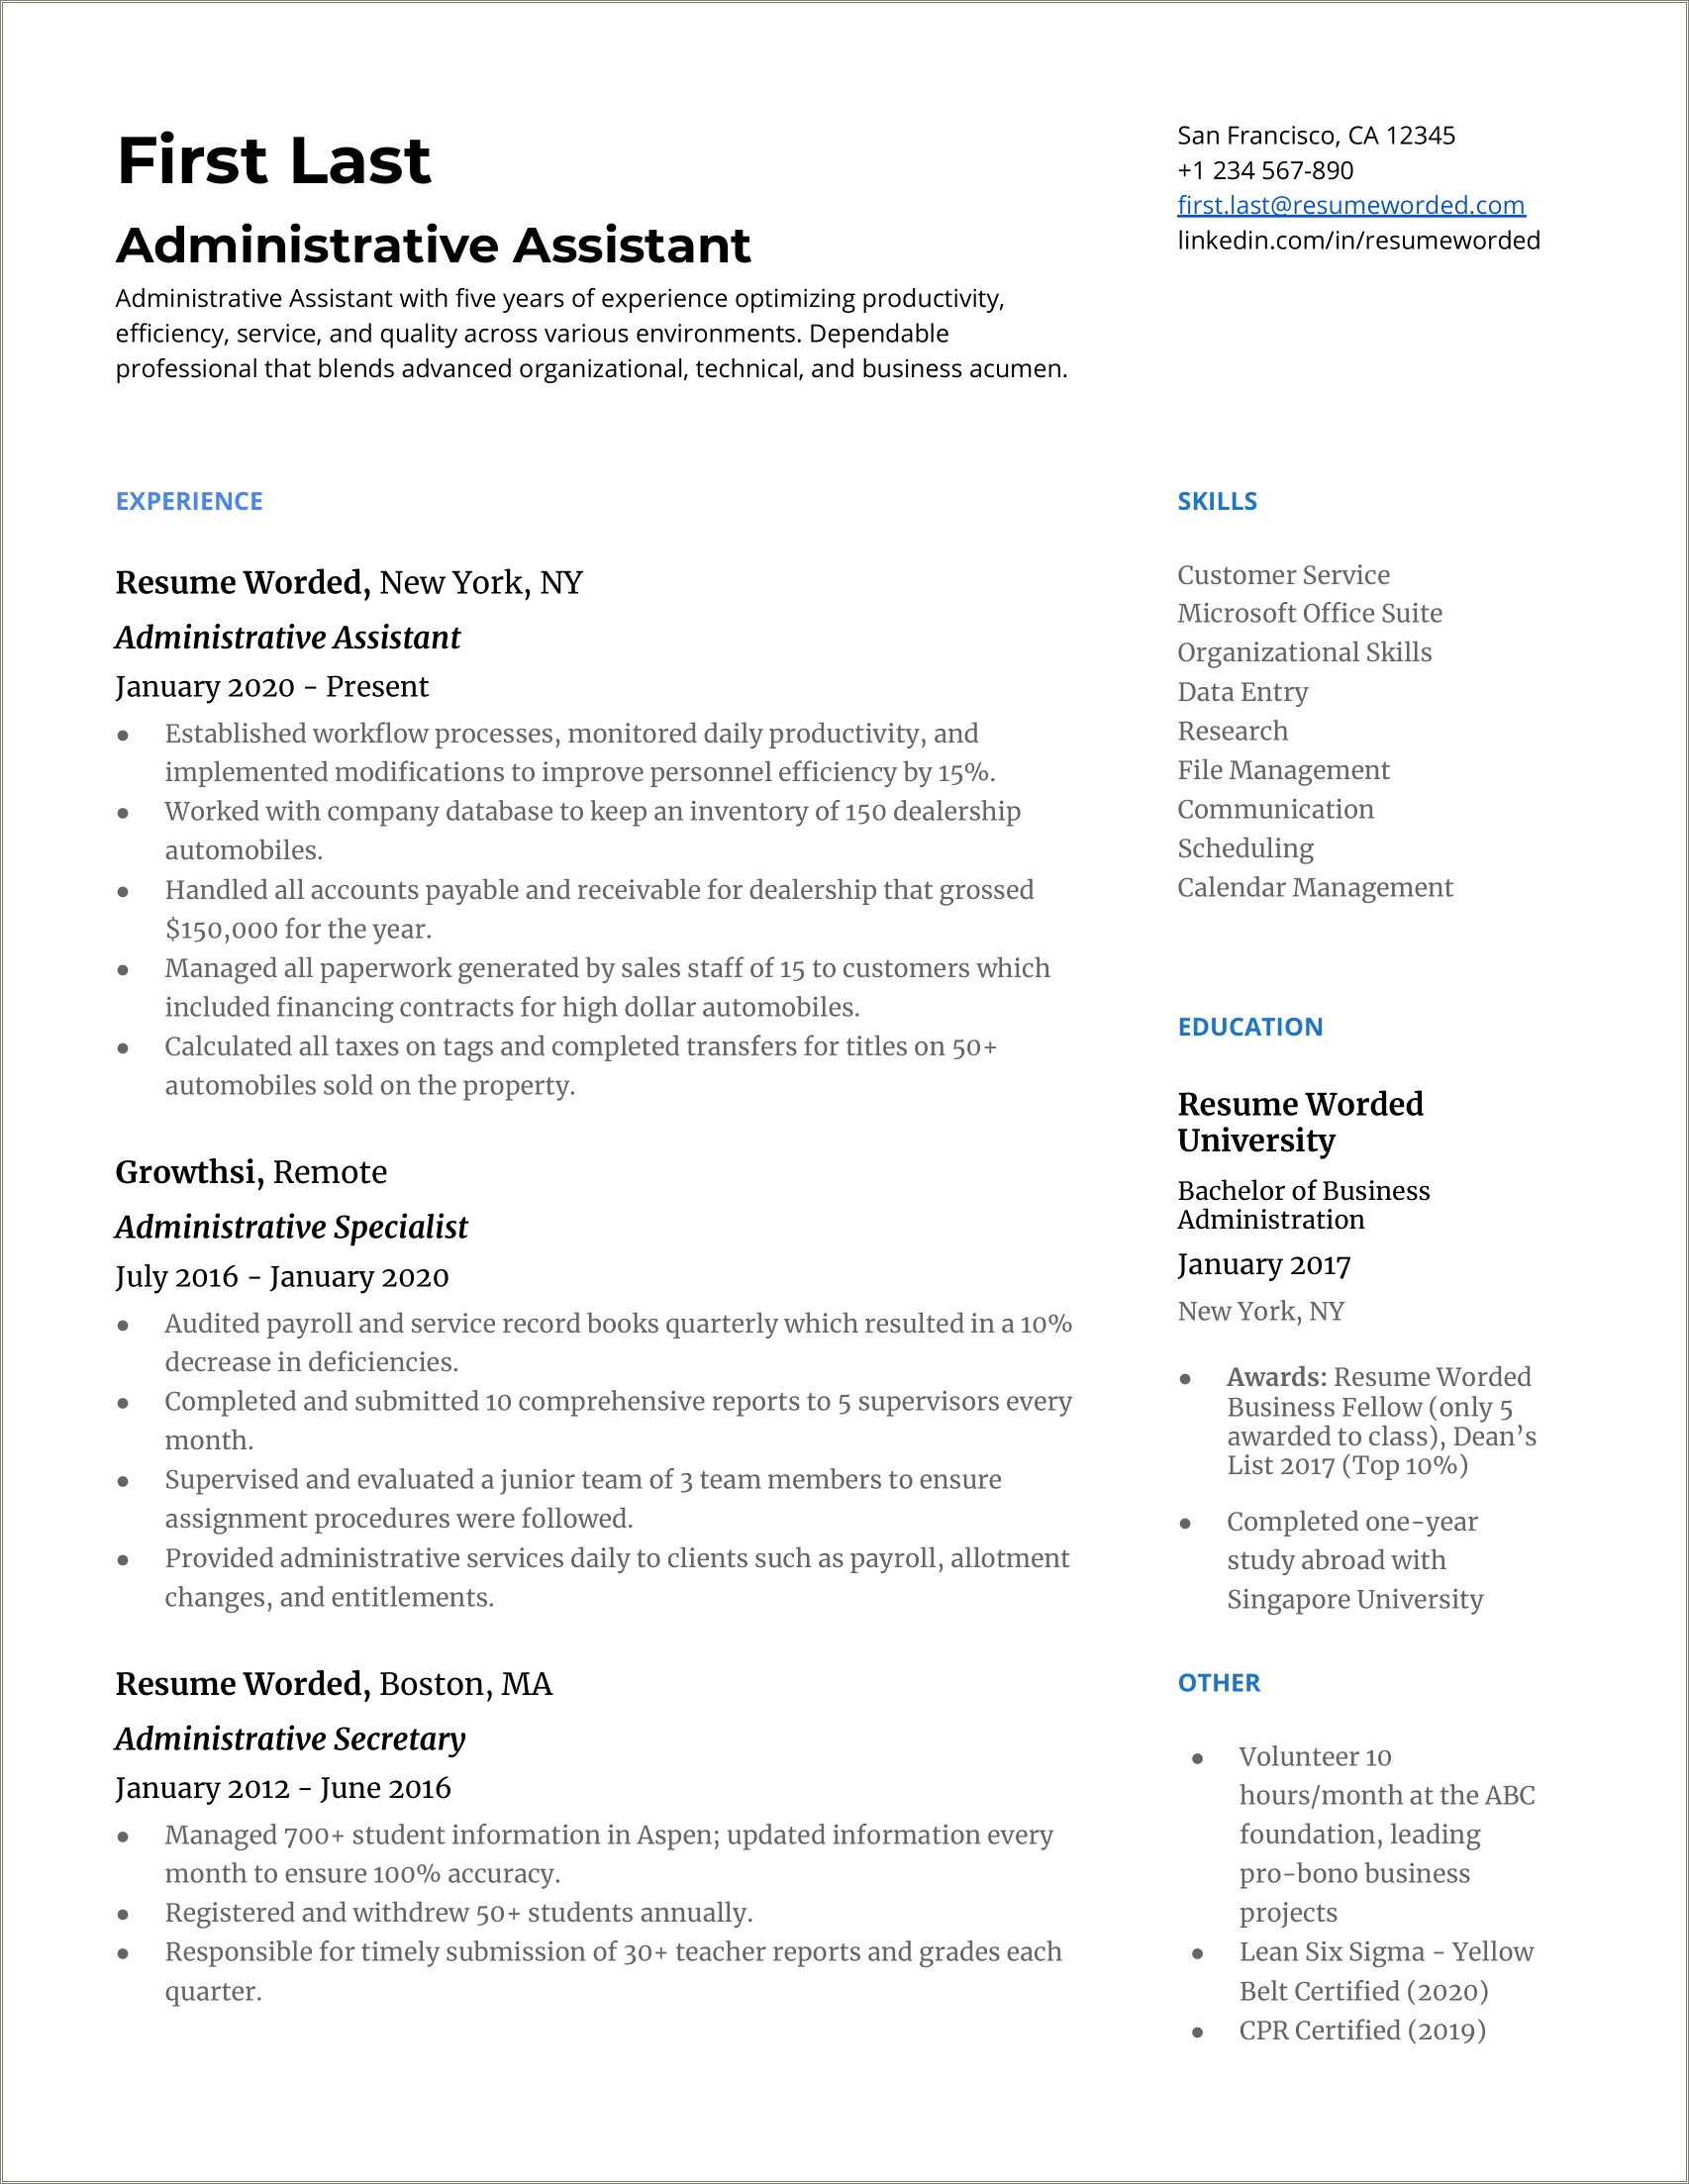 Sample Resume For Career Change To Administrative Assistant